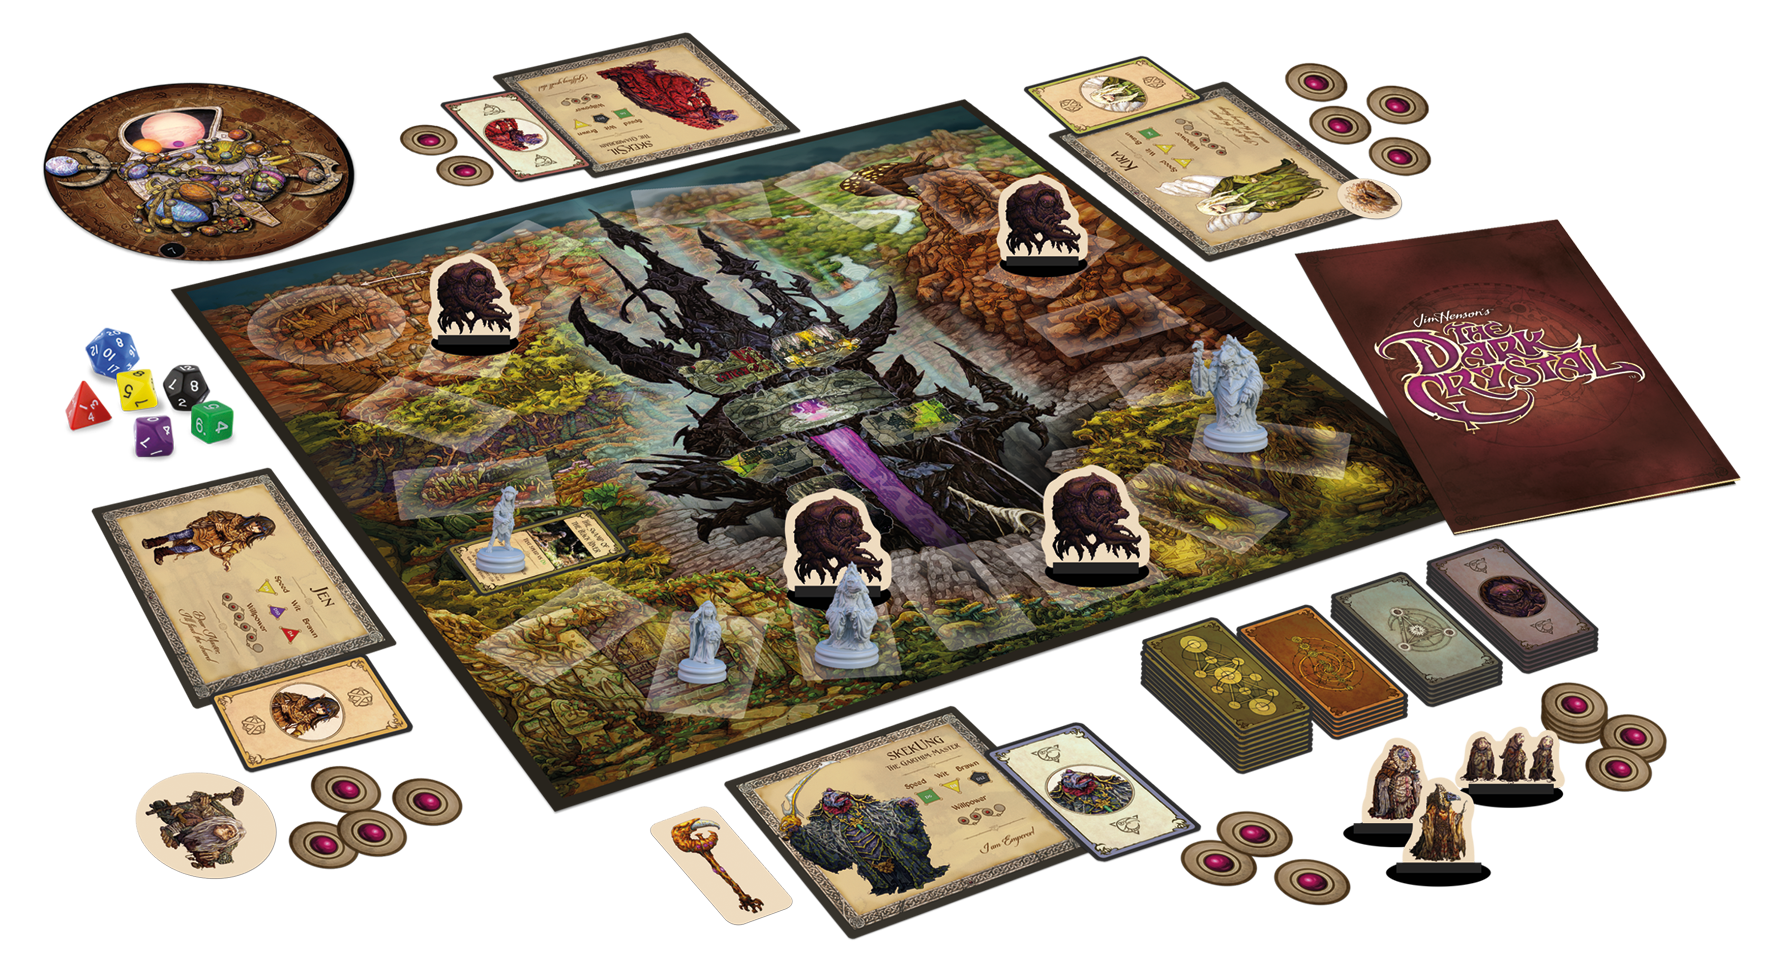 Components of Jim Henson's The Dark Crystal Board Game by River Horse